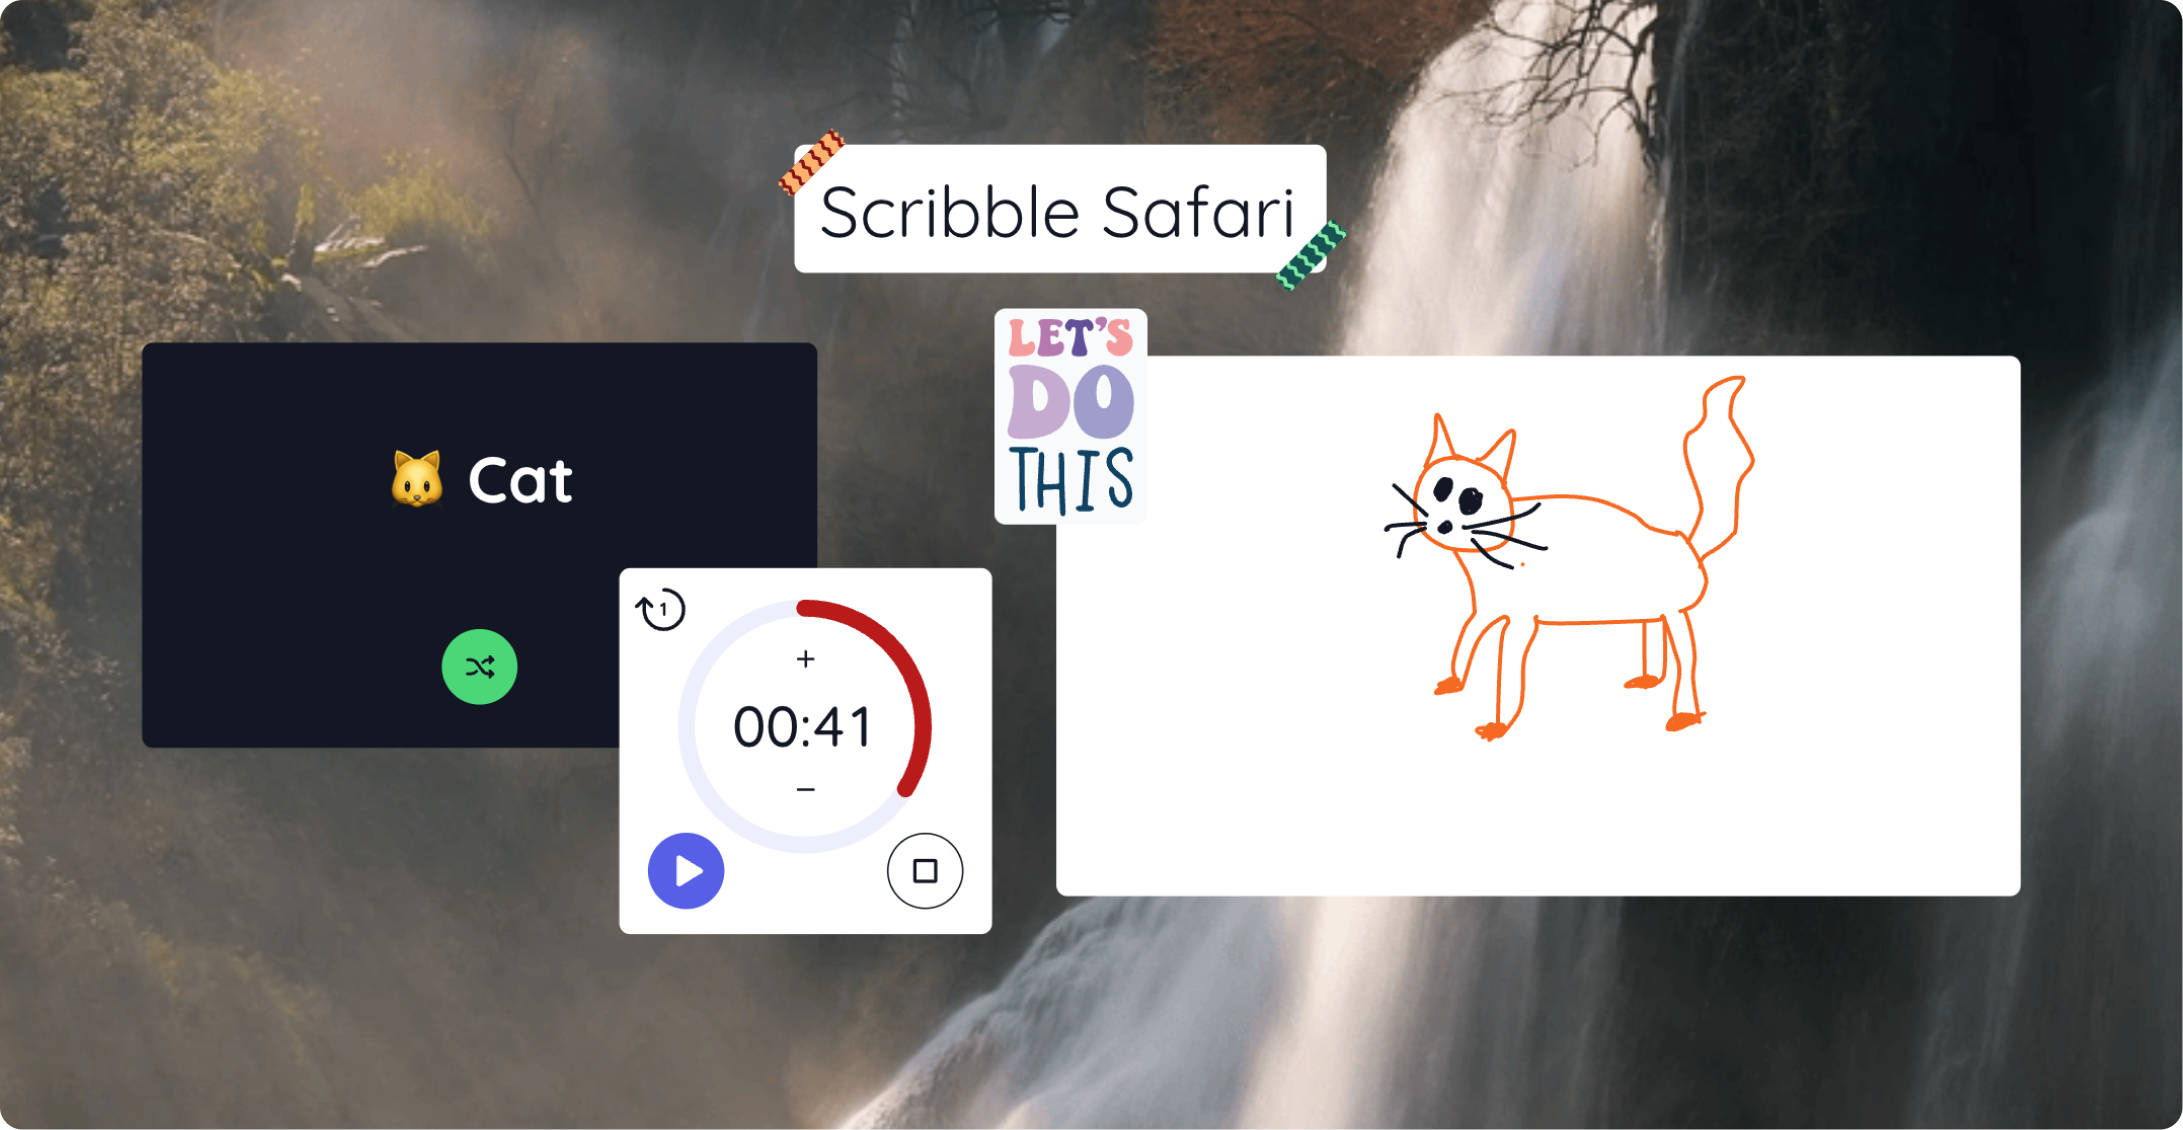 This brain break called 'Scribble Safari' will bring out the inner artist in everyone in a fun and light-hearted exercise designed to be the ideal stress-reliever.